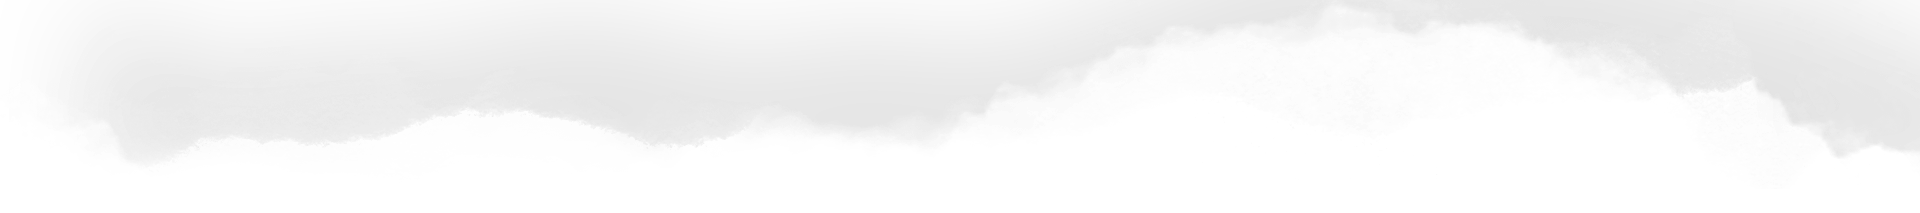 A black and white photo of some clouds